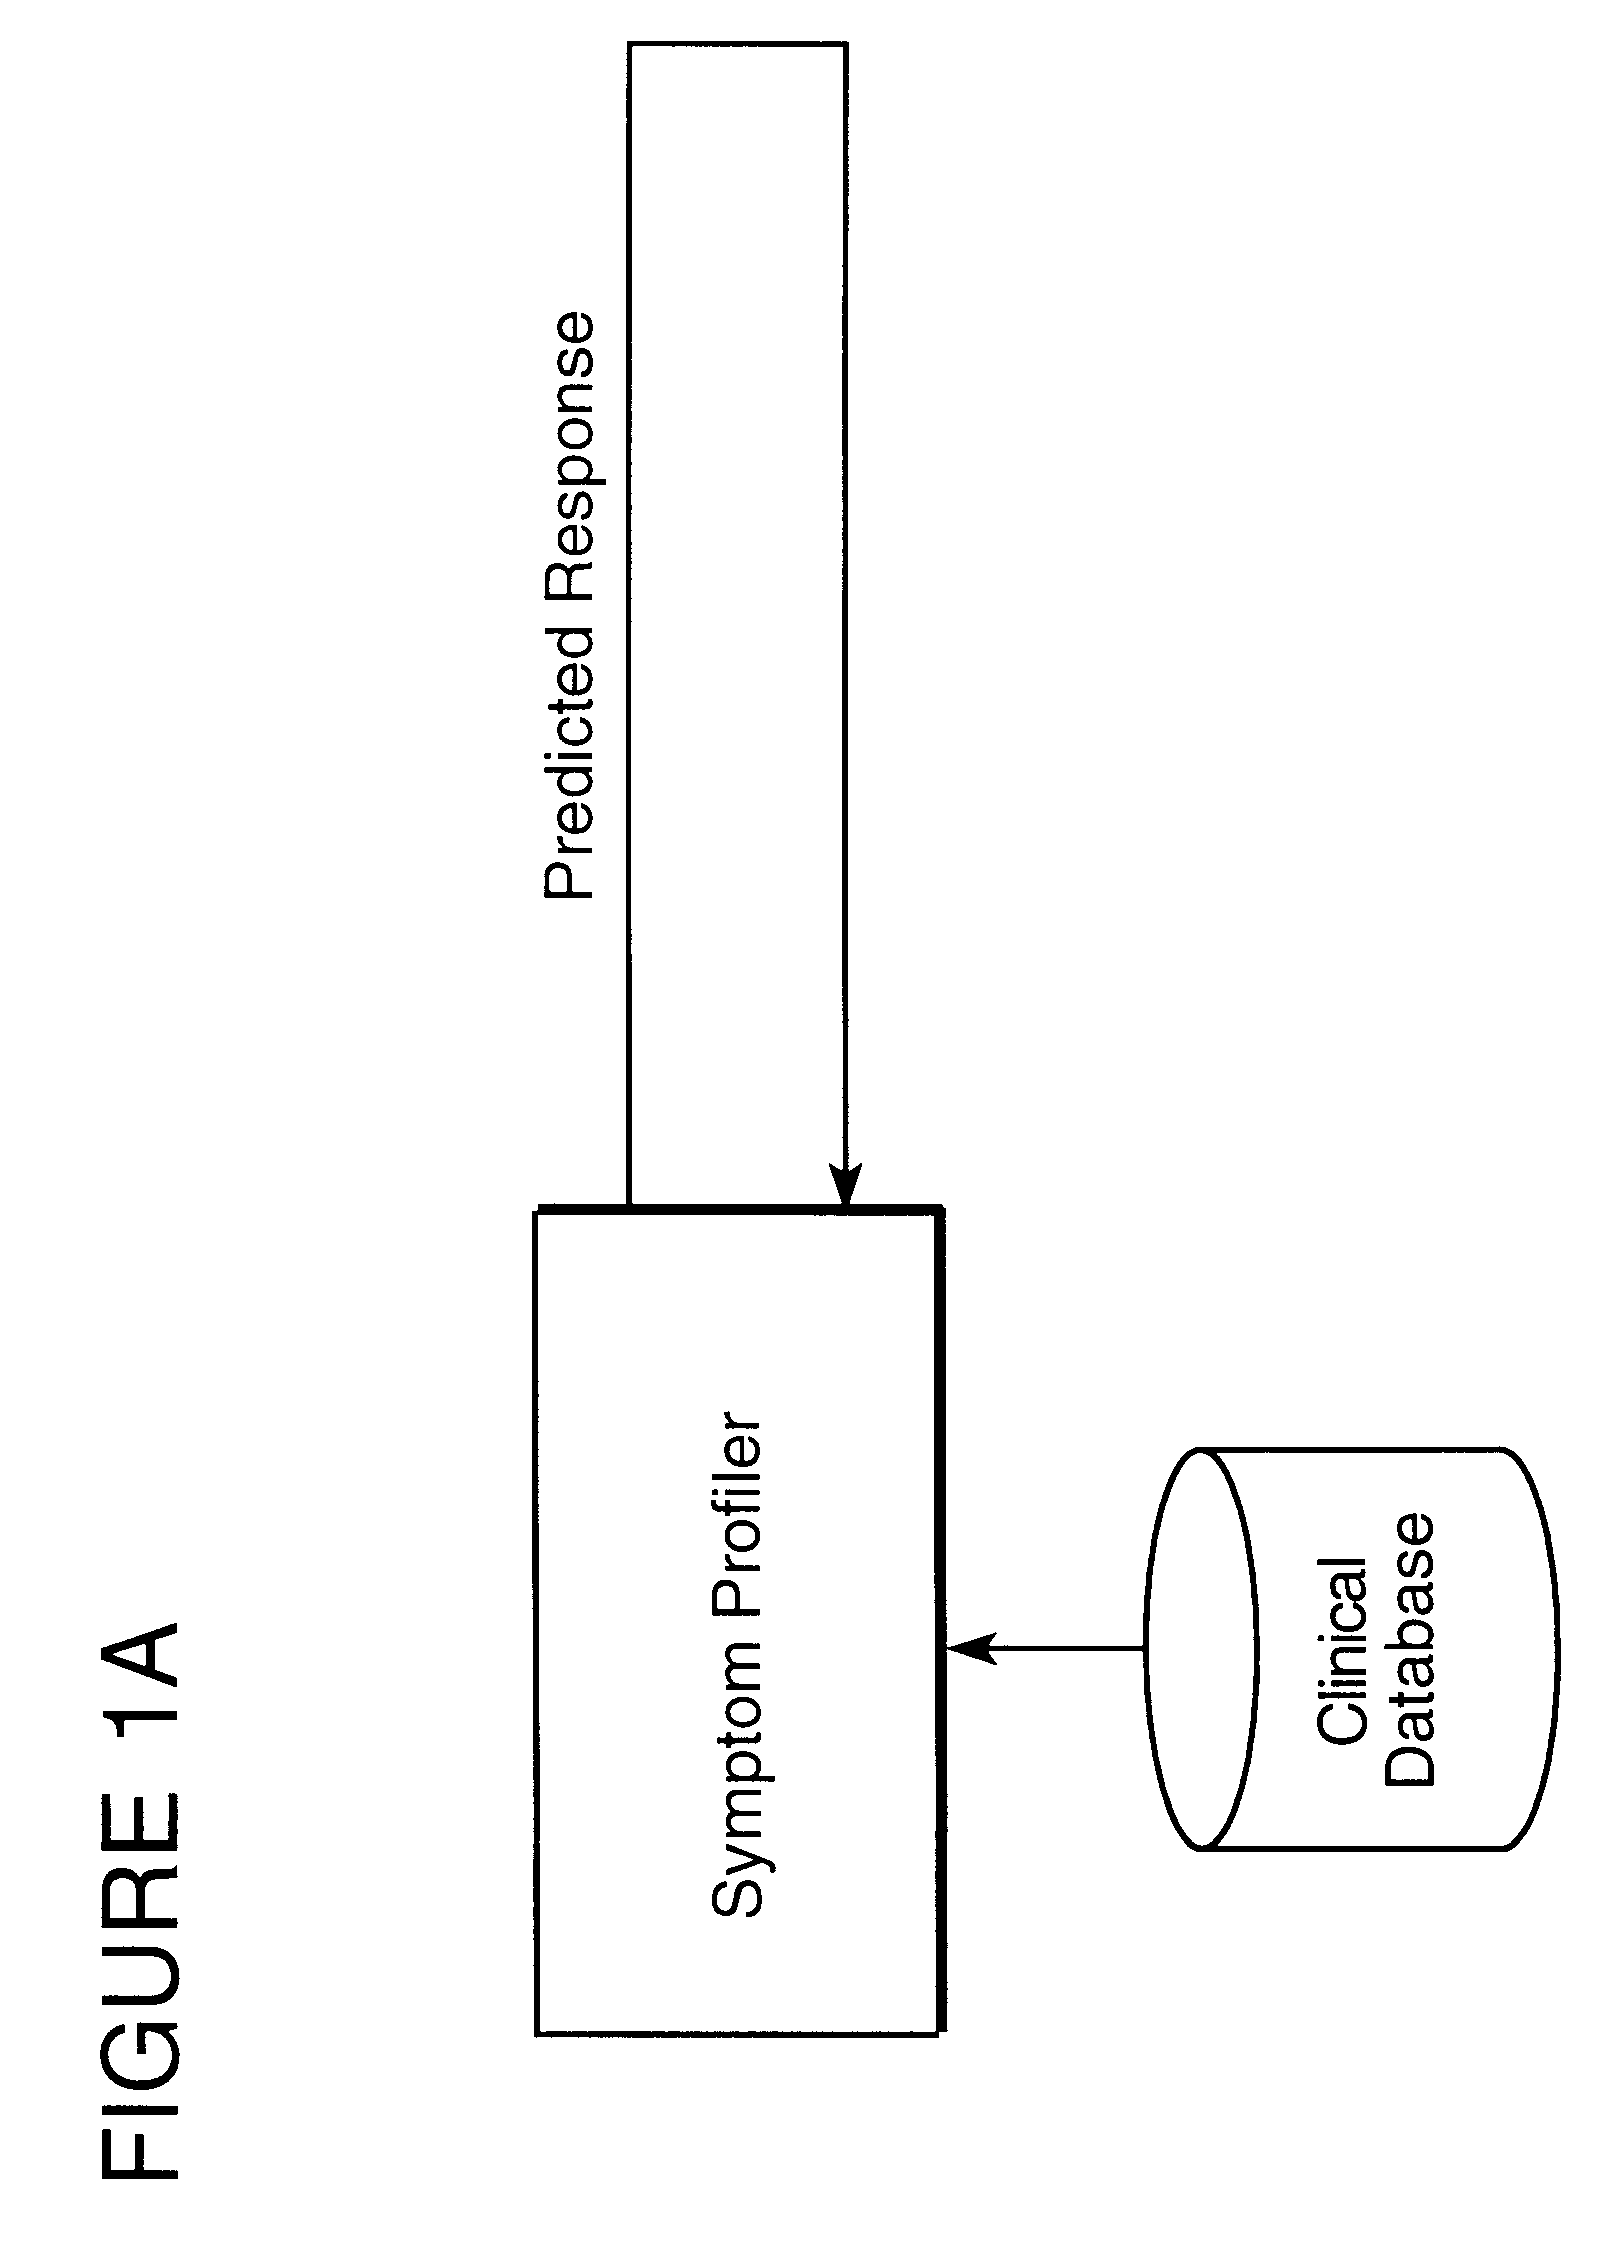 Method for predicting the therapeutic outcome of a treatment